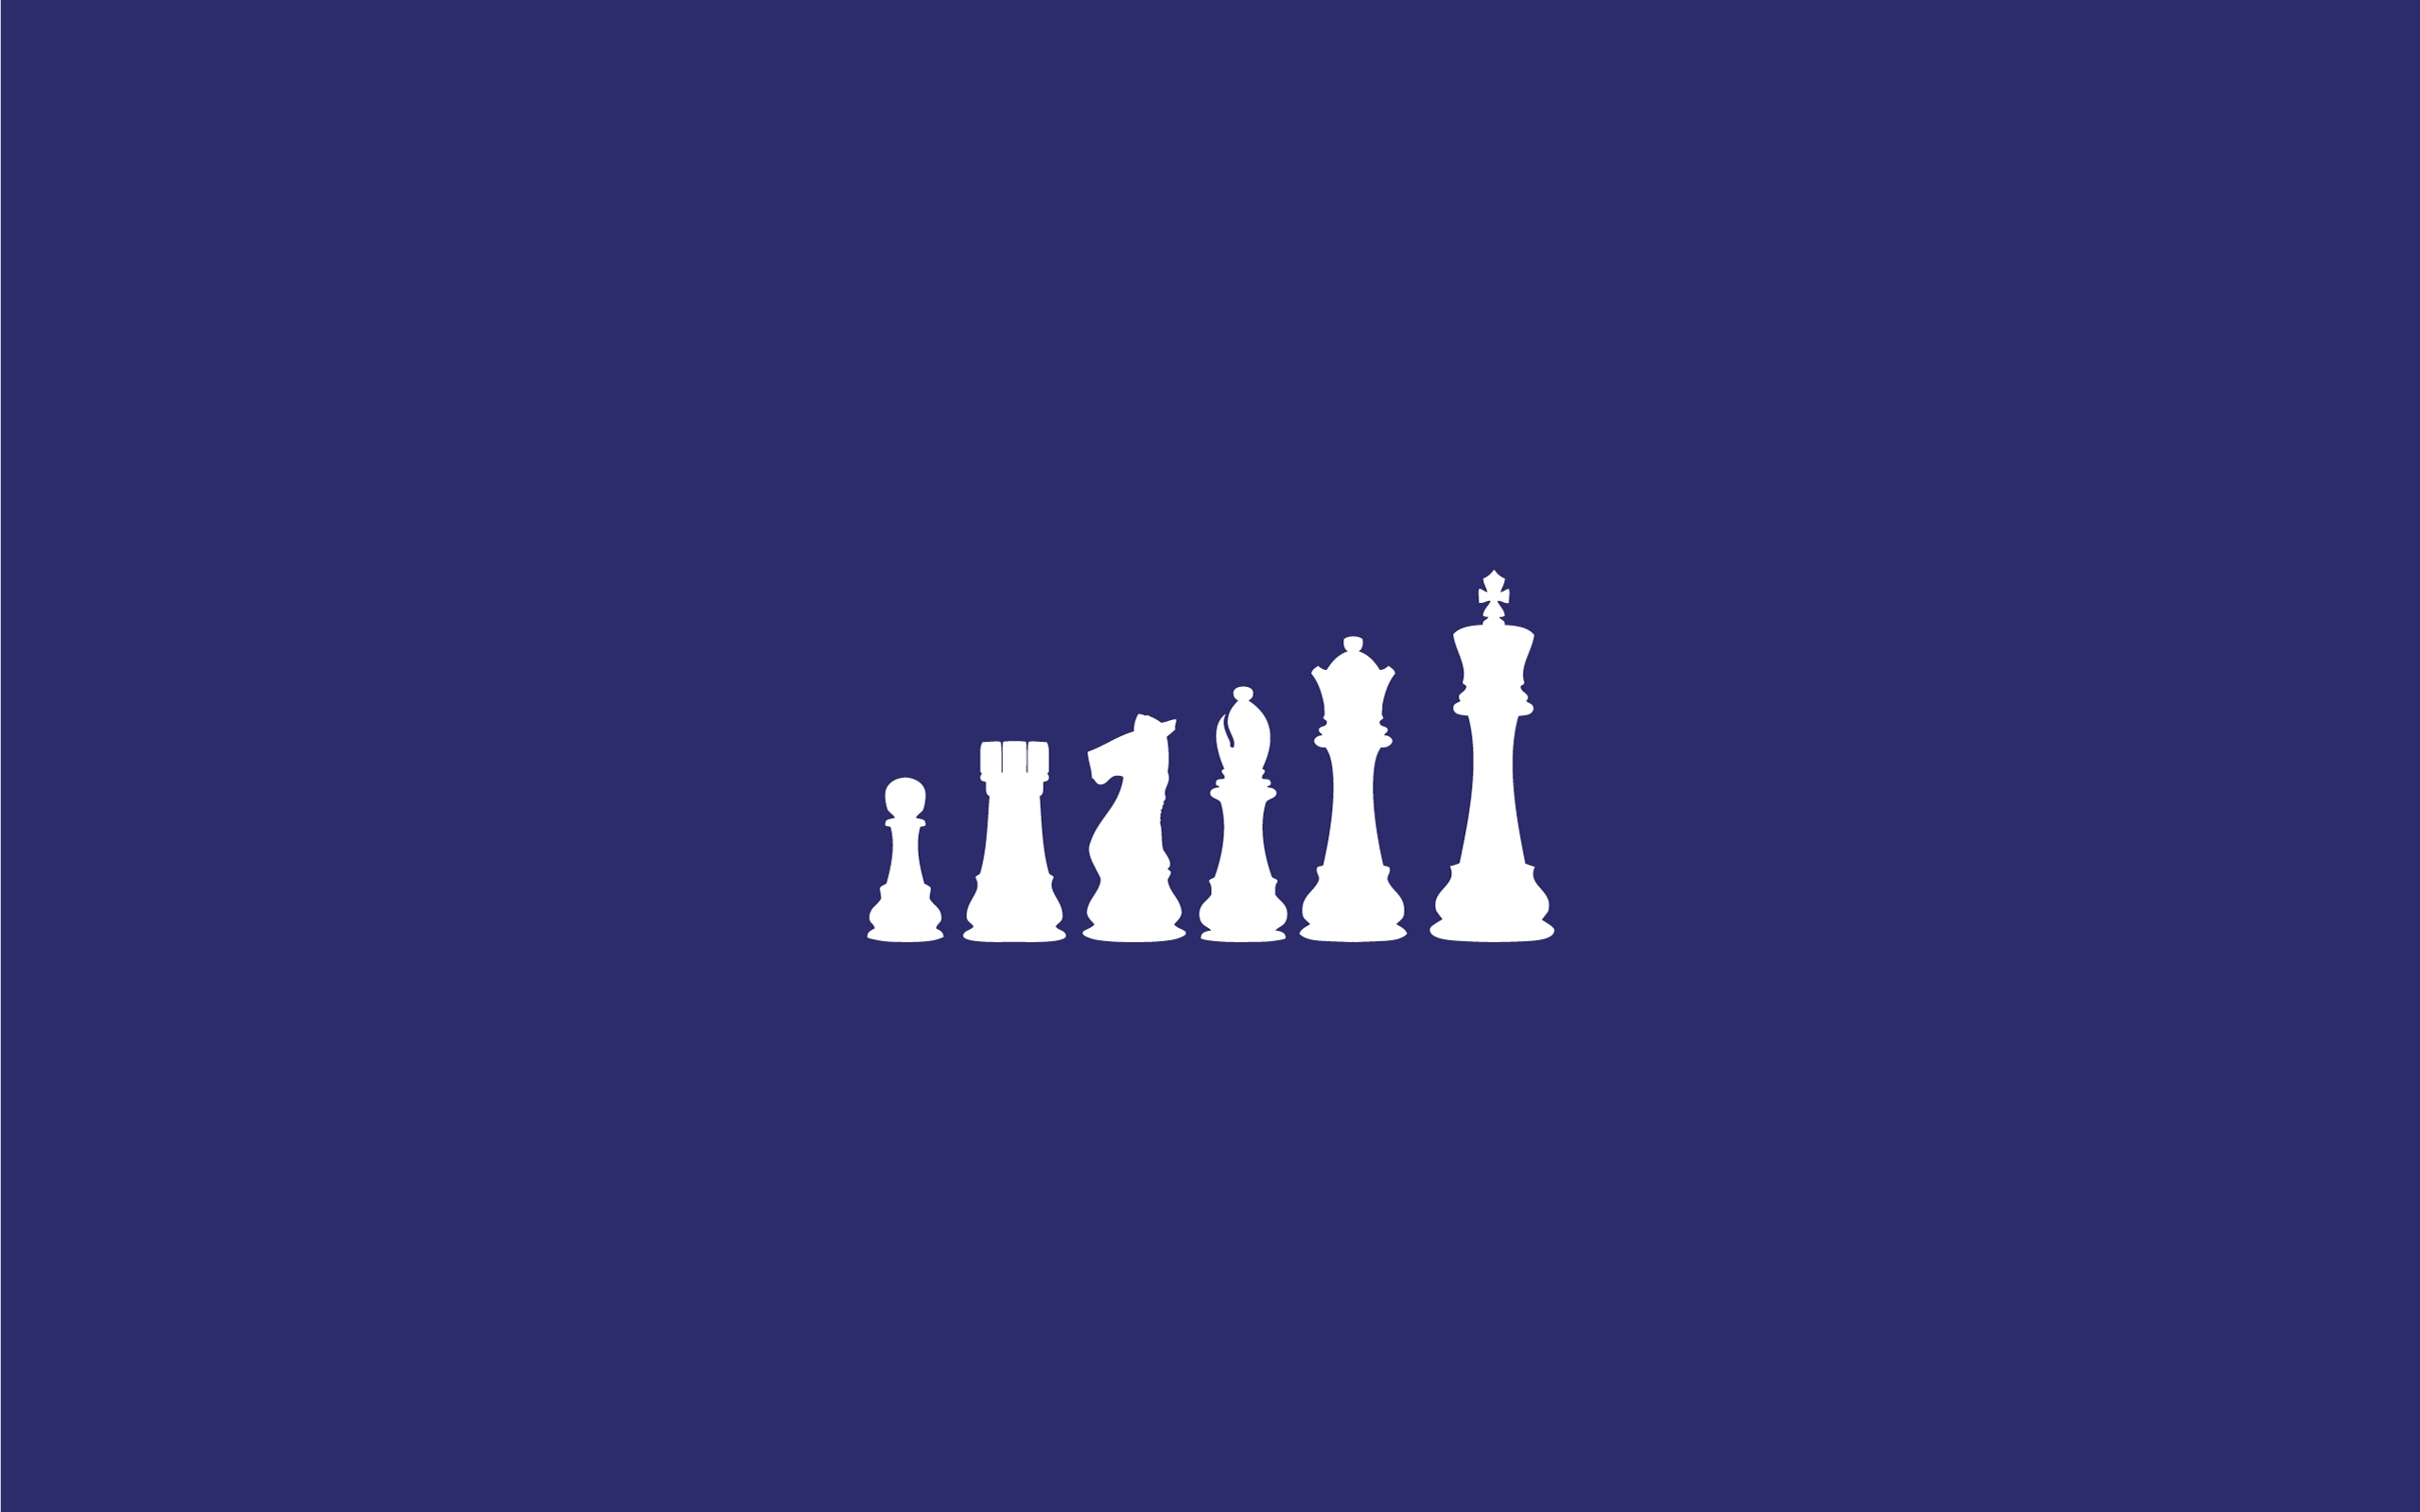 Chess Figures for 2560 x 1600 widescreen resolution